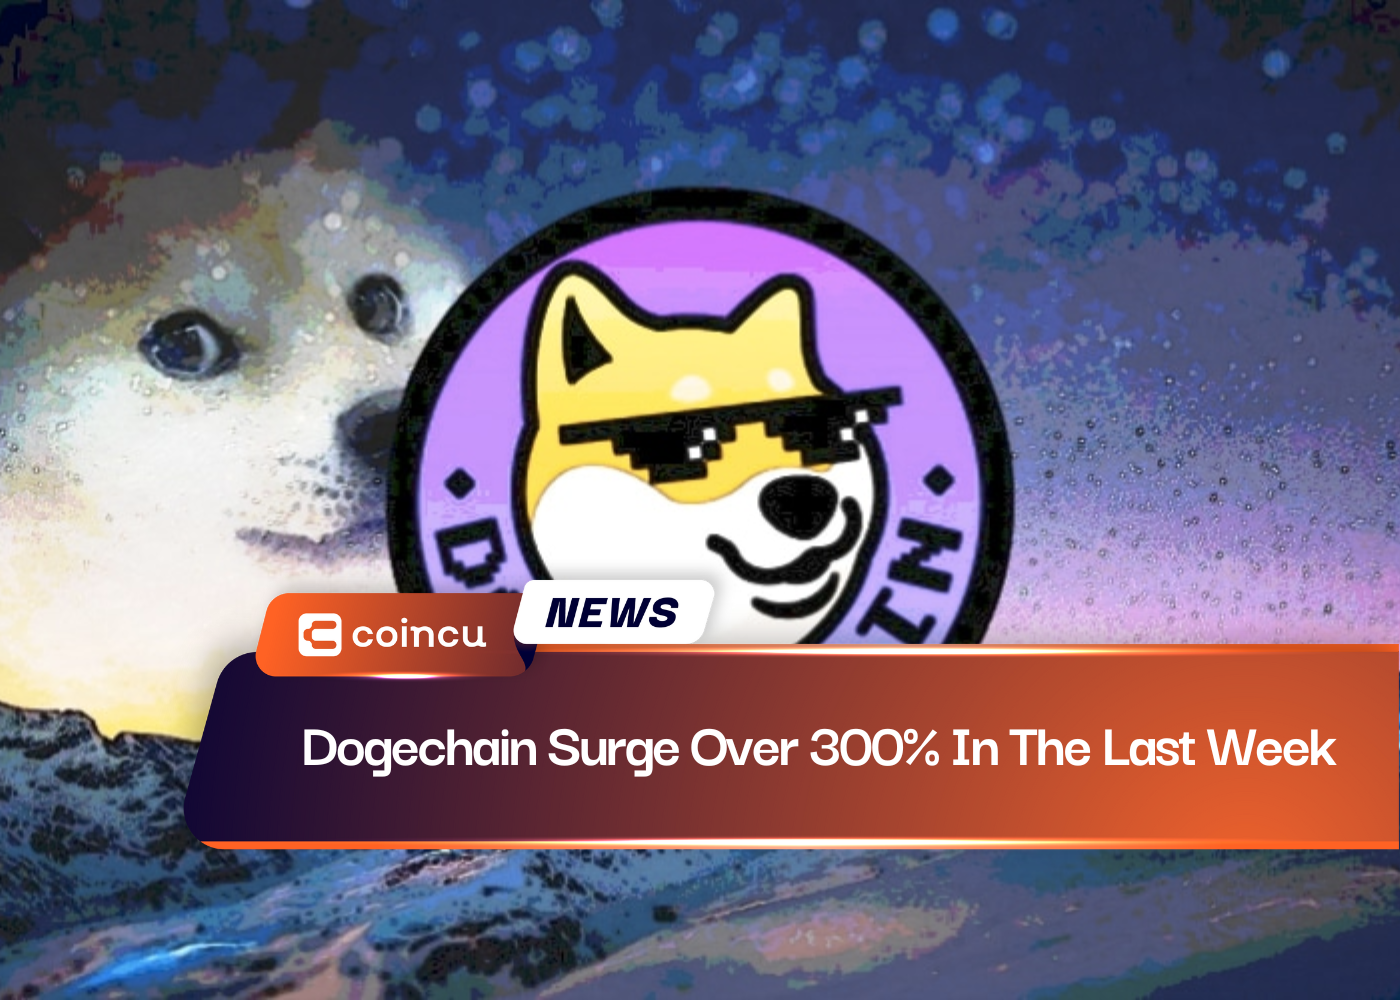 Dogechain Surge Over 300% In The Last Week